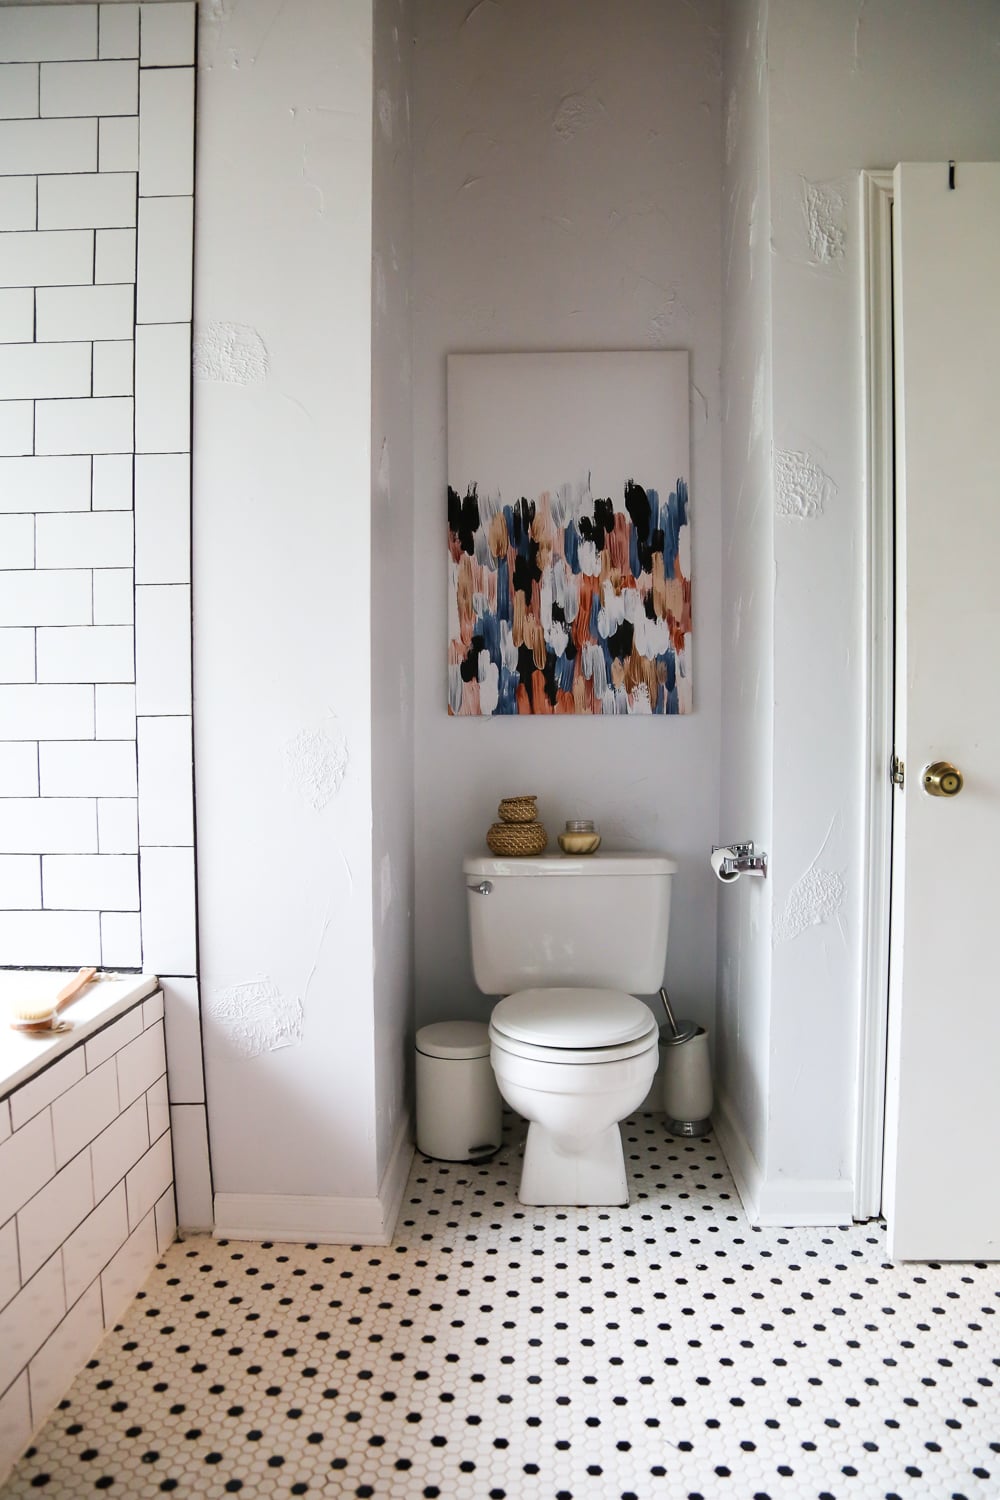 This master bathroom remodel is absolutely gorgeous. SO many inspiring ideas, gorgeous black and white tile, and it's all one big DIY renovation! You HAVE to see the rest of the photos!